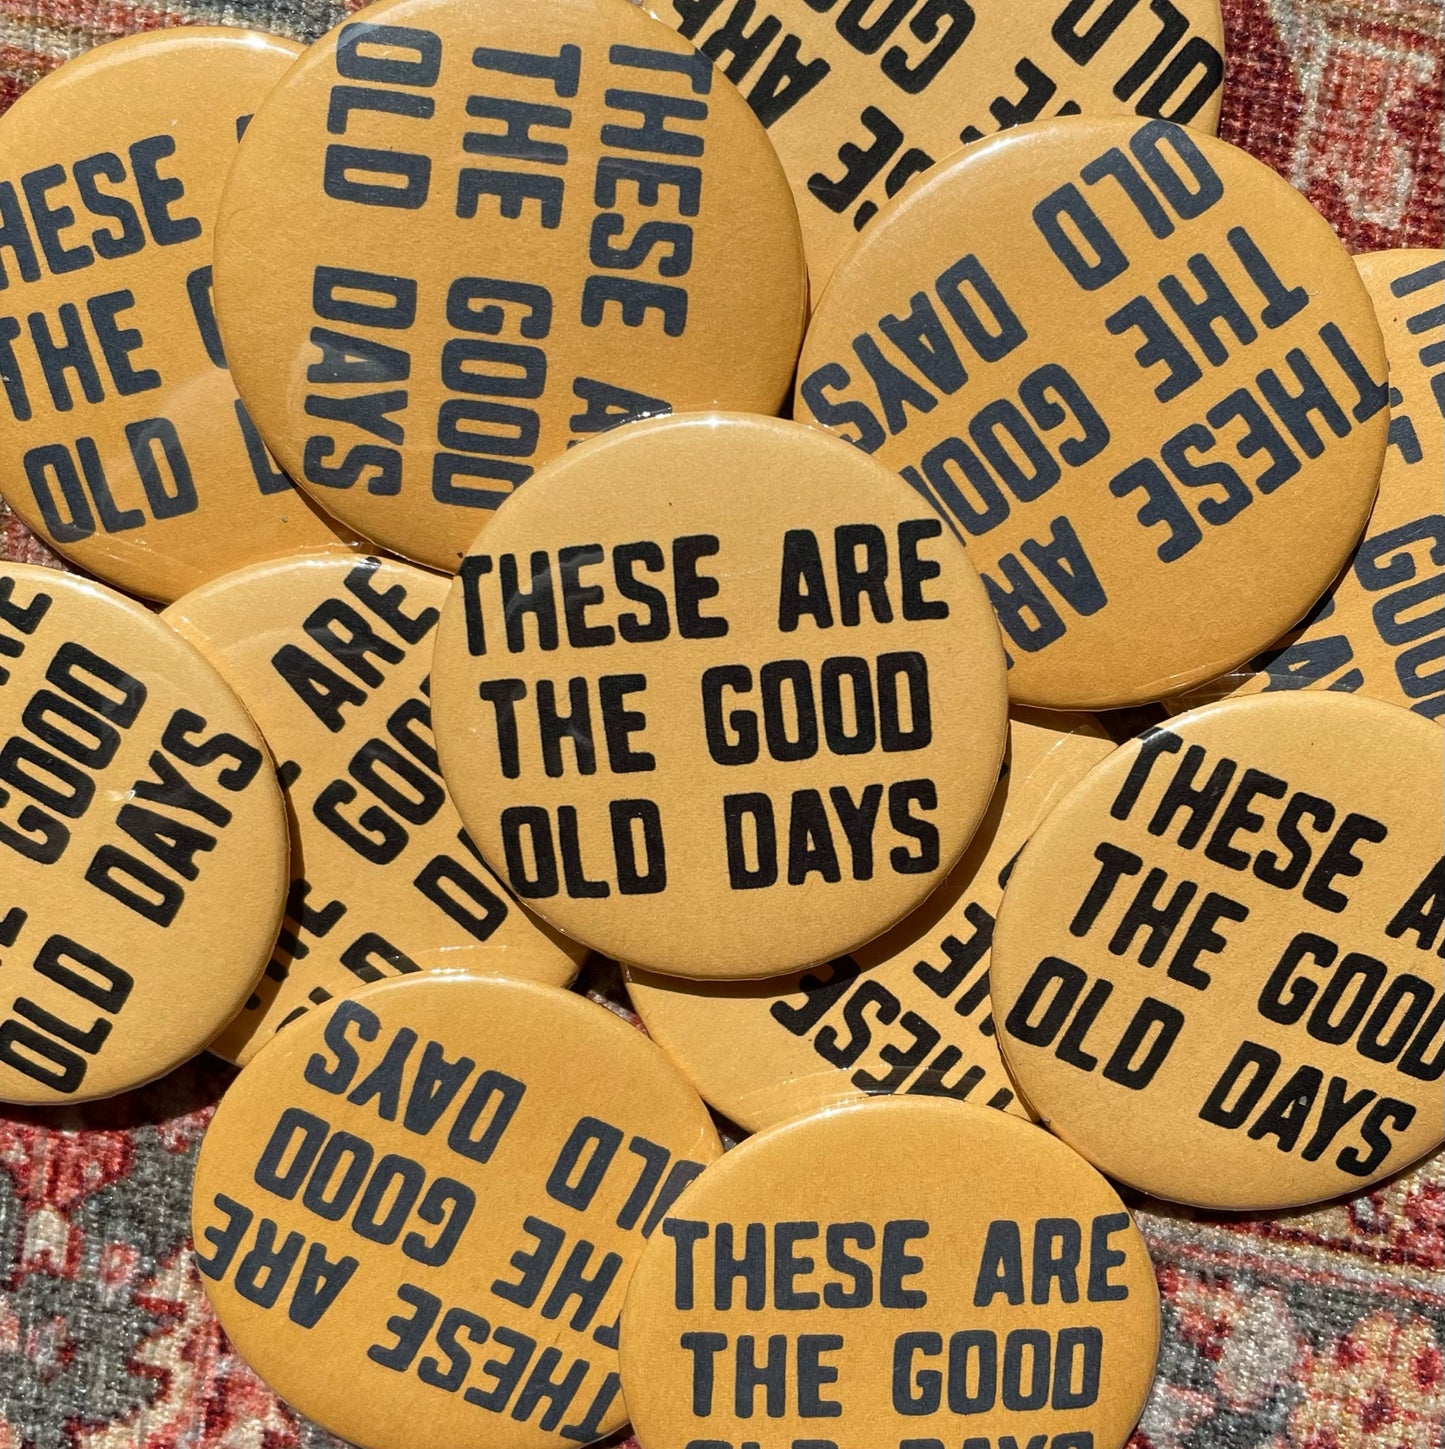 "THESE ARE THE GOOD OLD DAYS" button